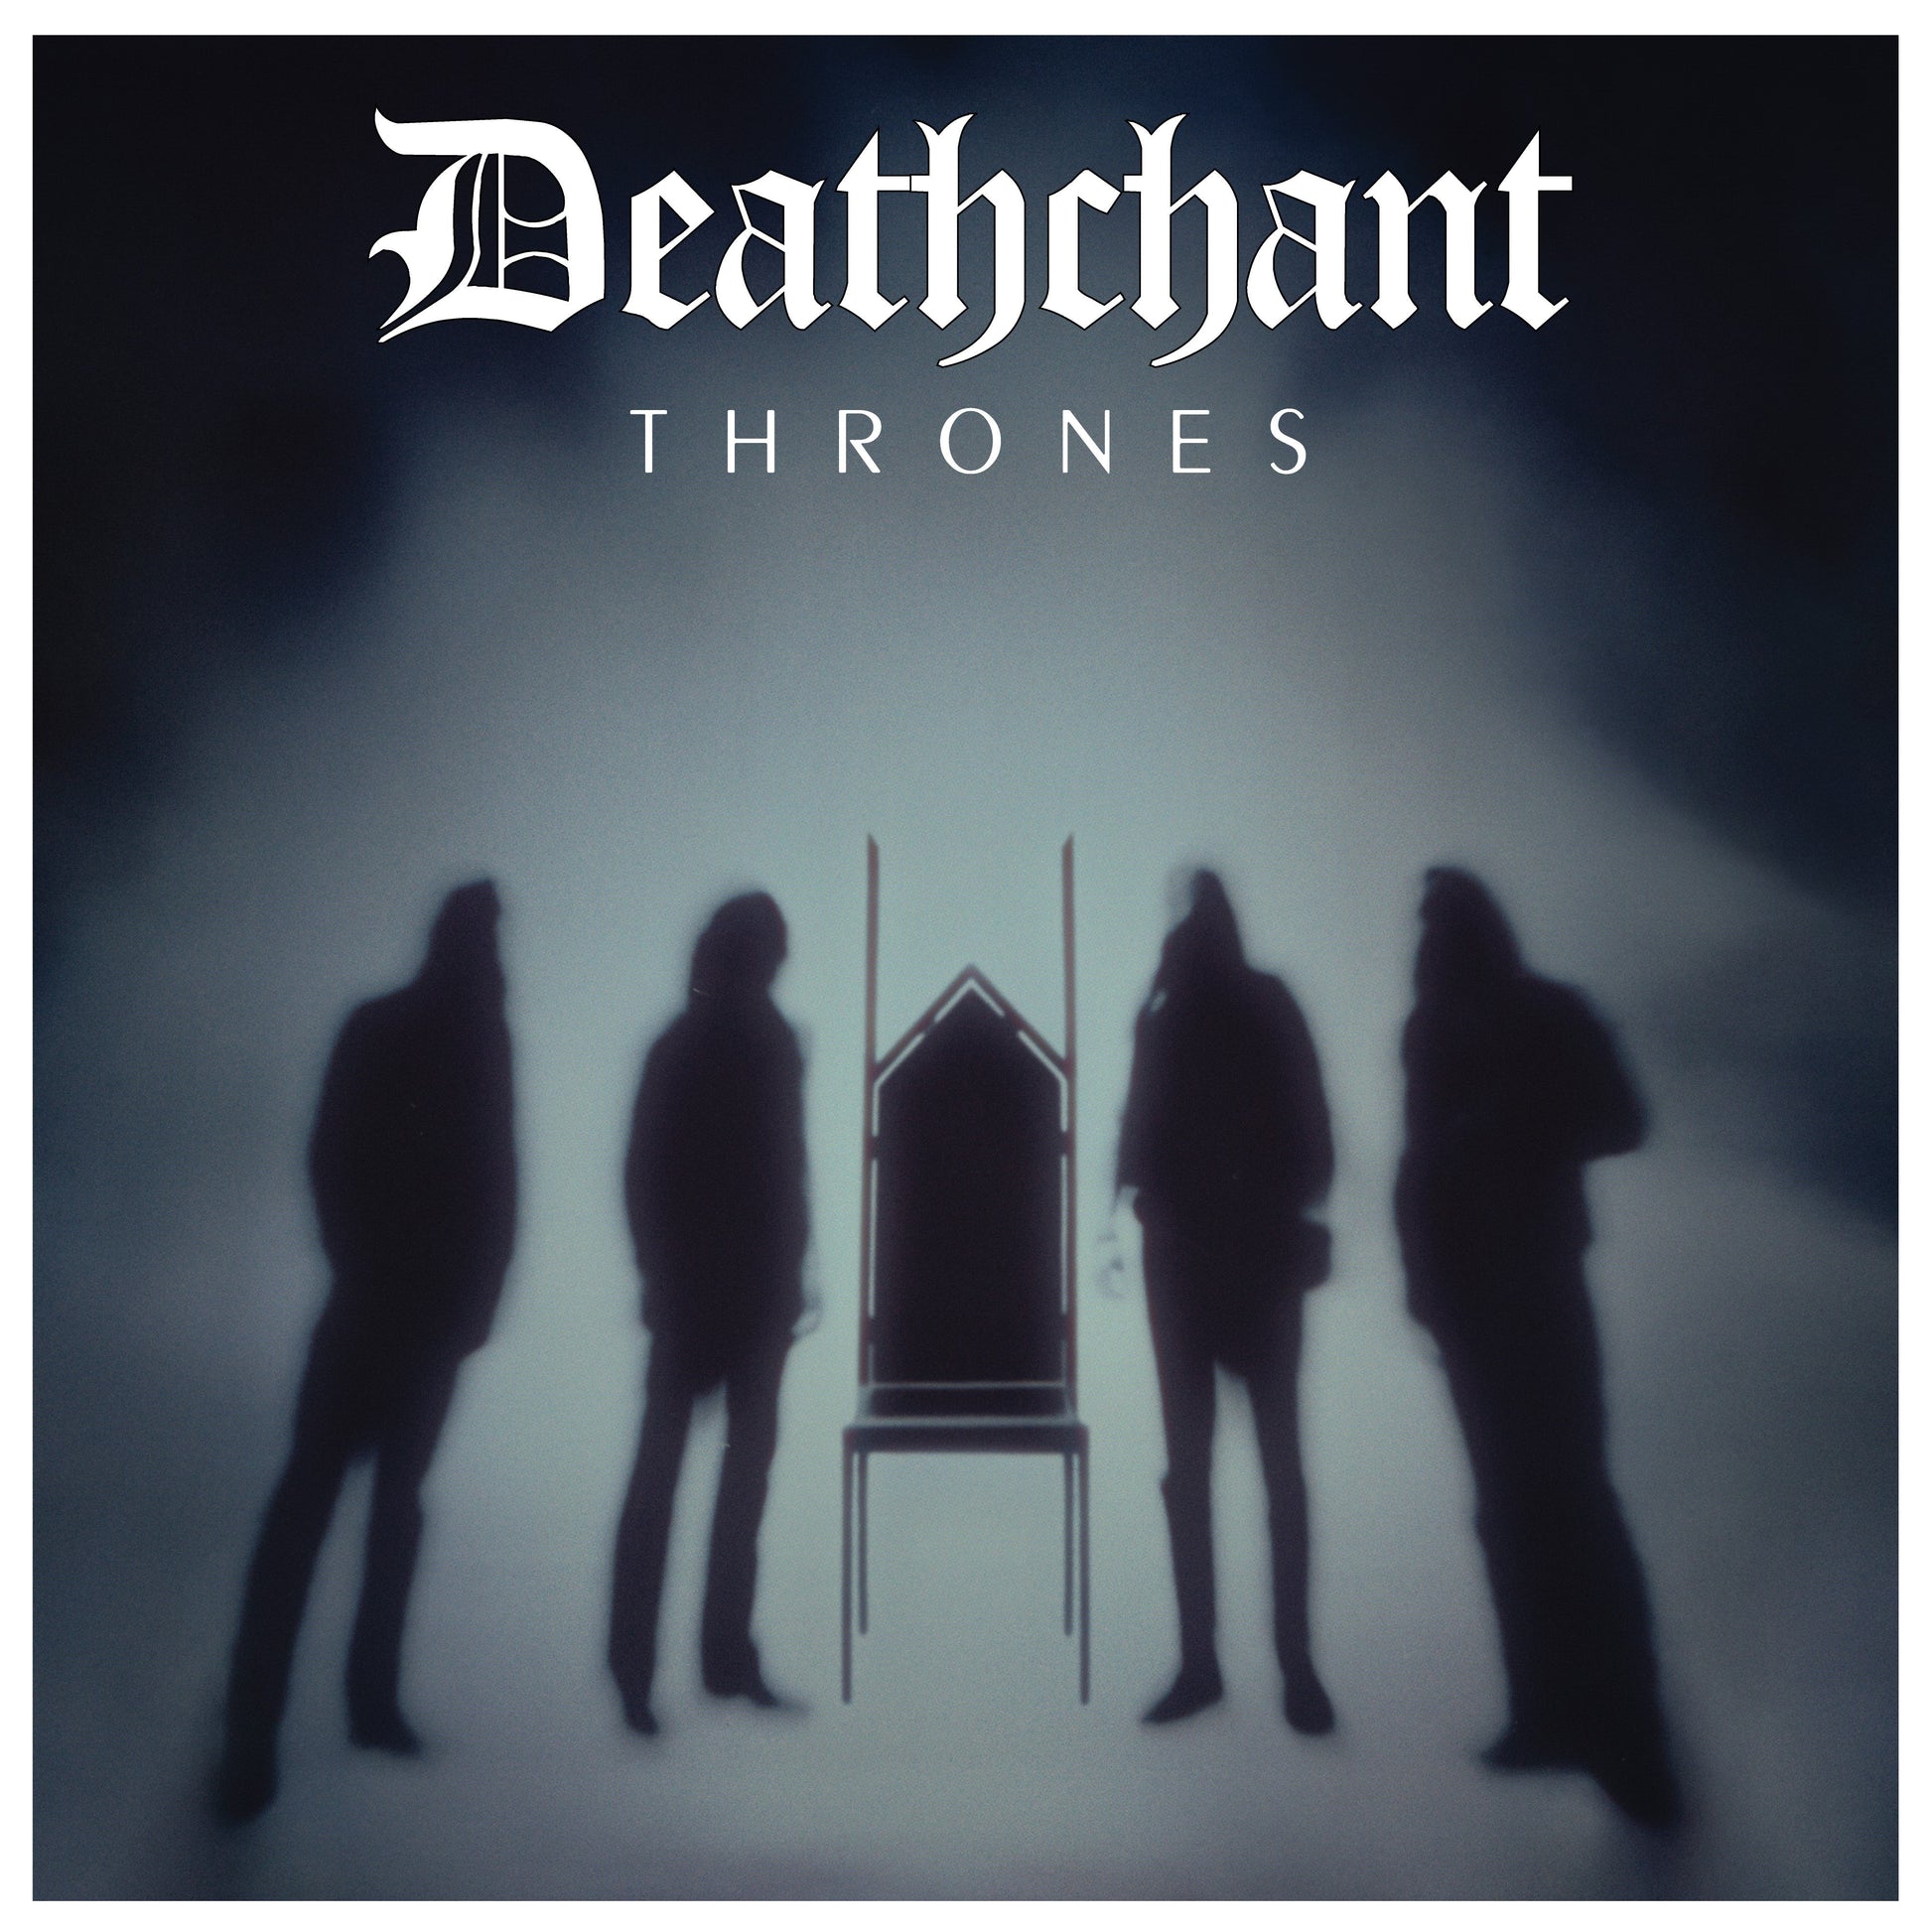 Arcade Sound - Deathchant - Thrones front cover